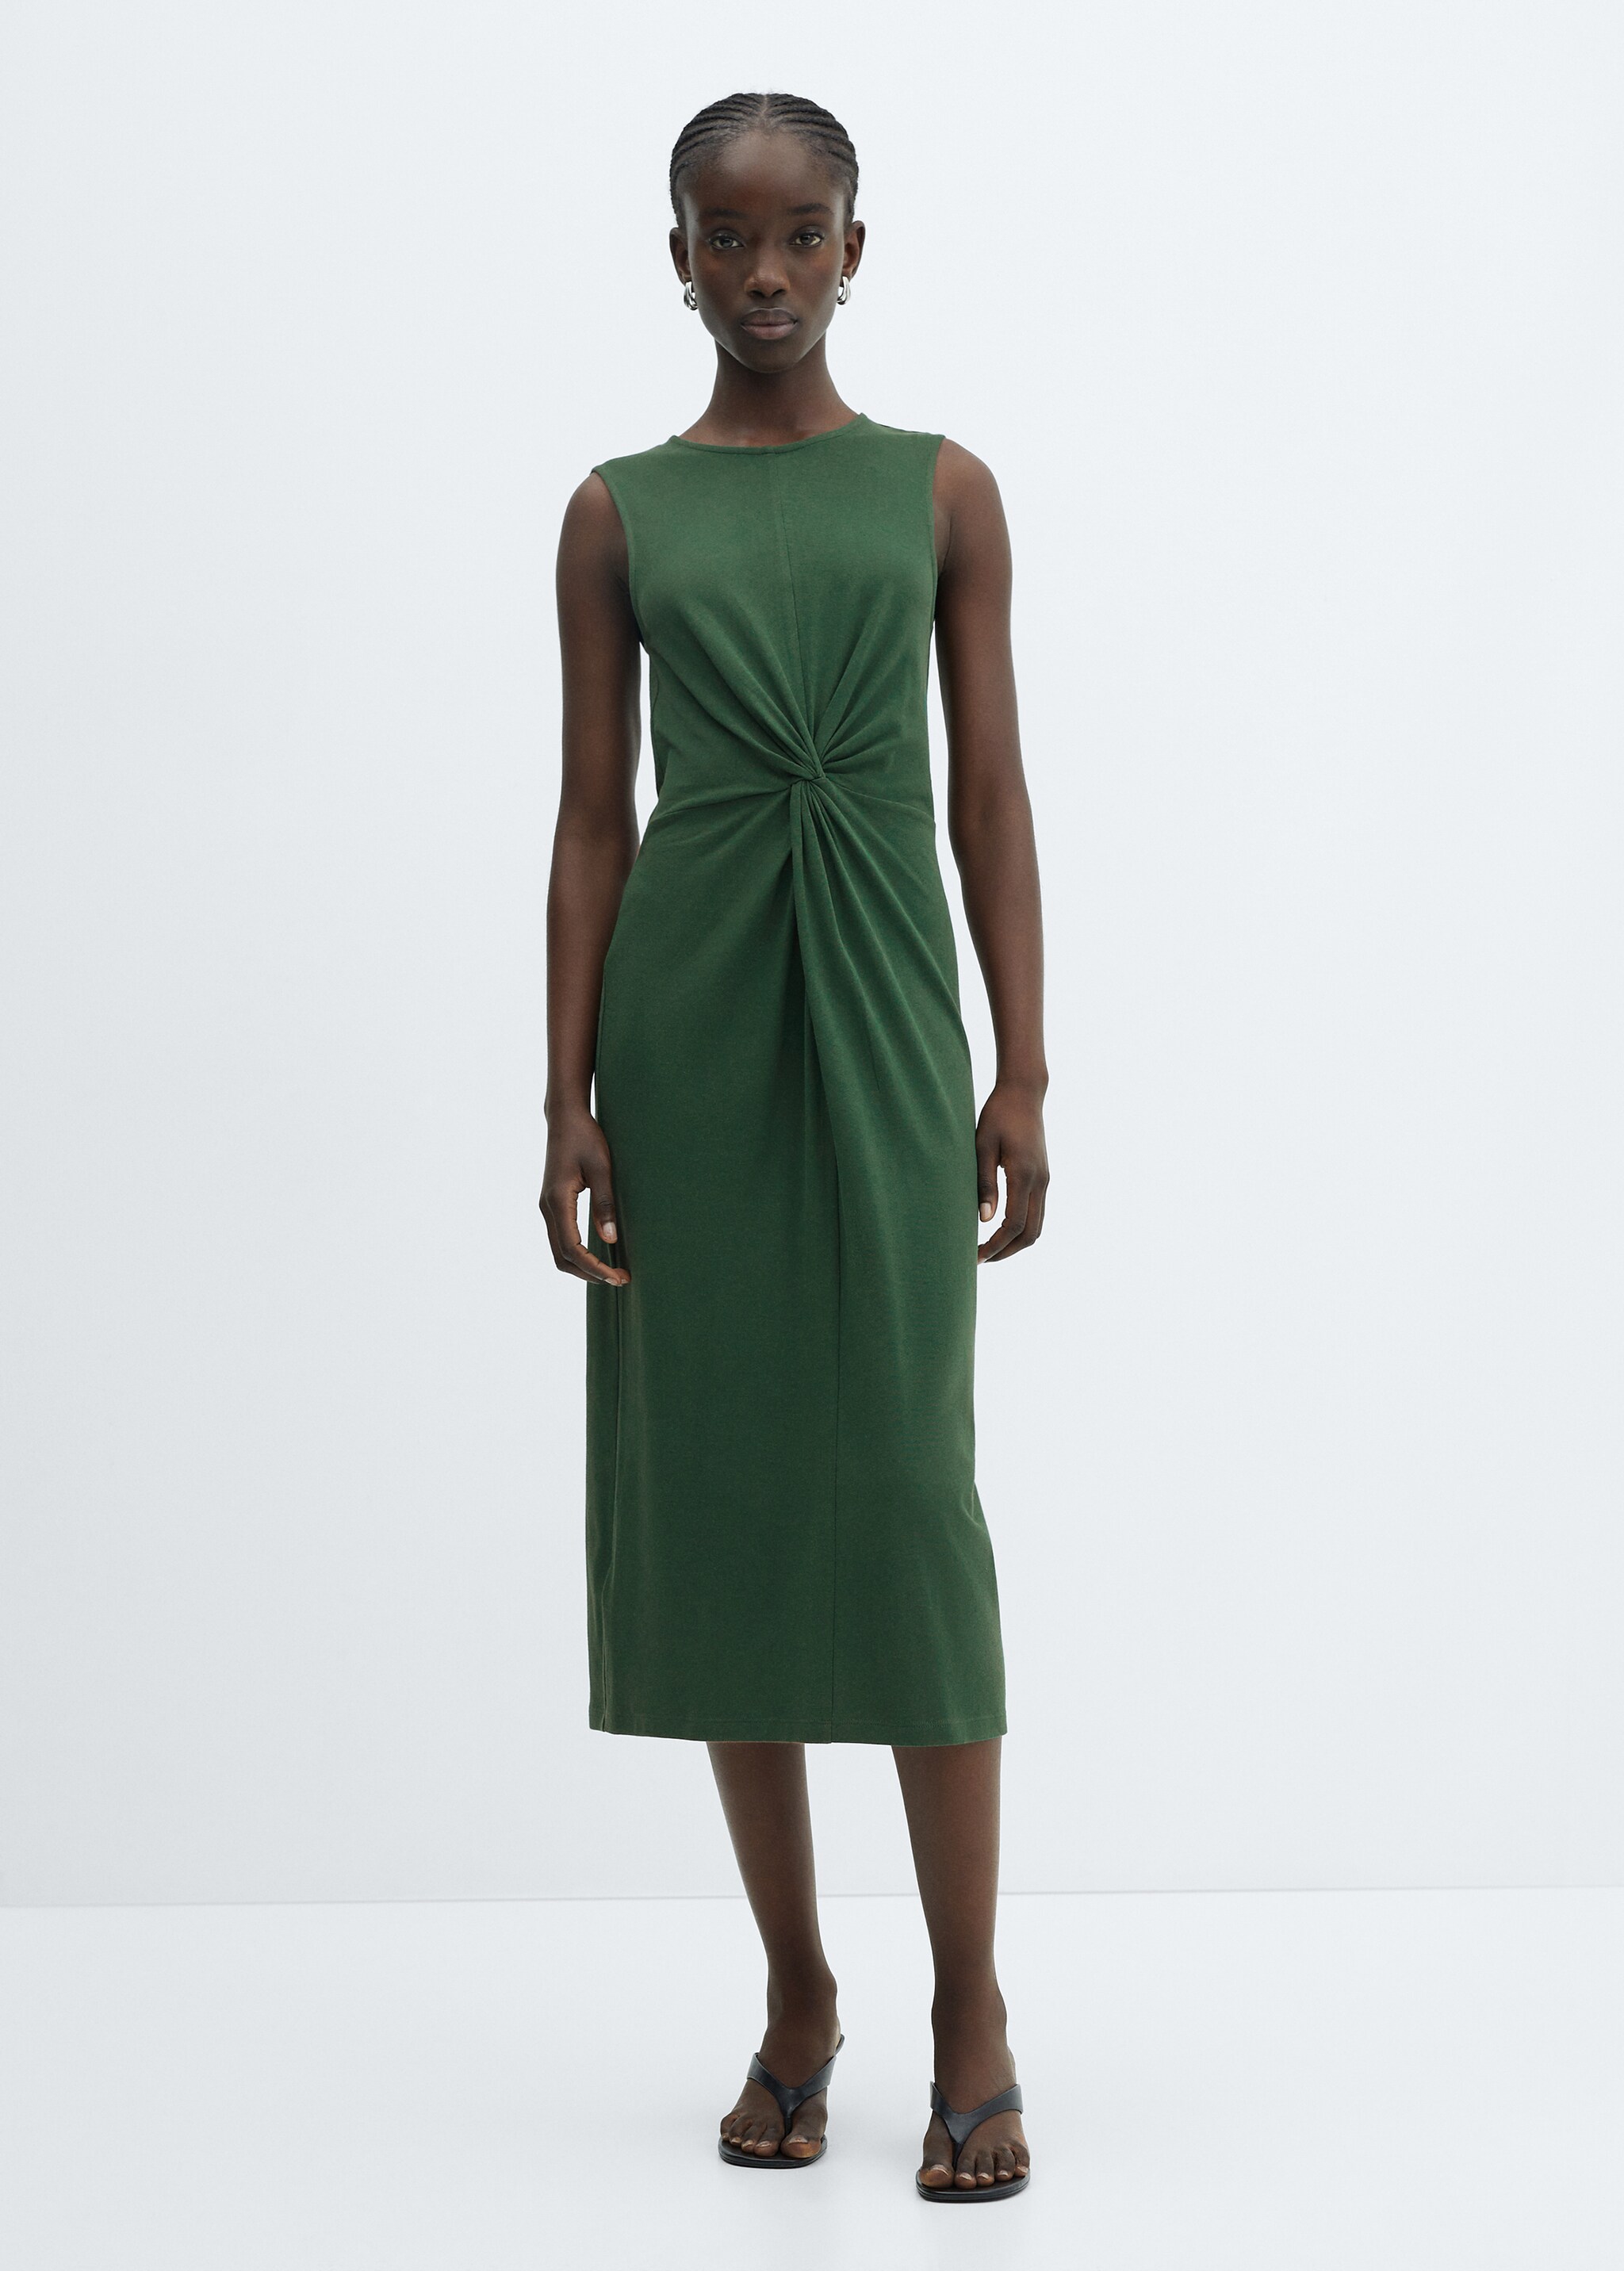 Knotted cotton dress - General plane